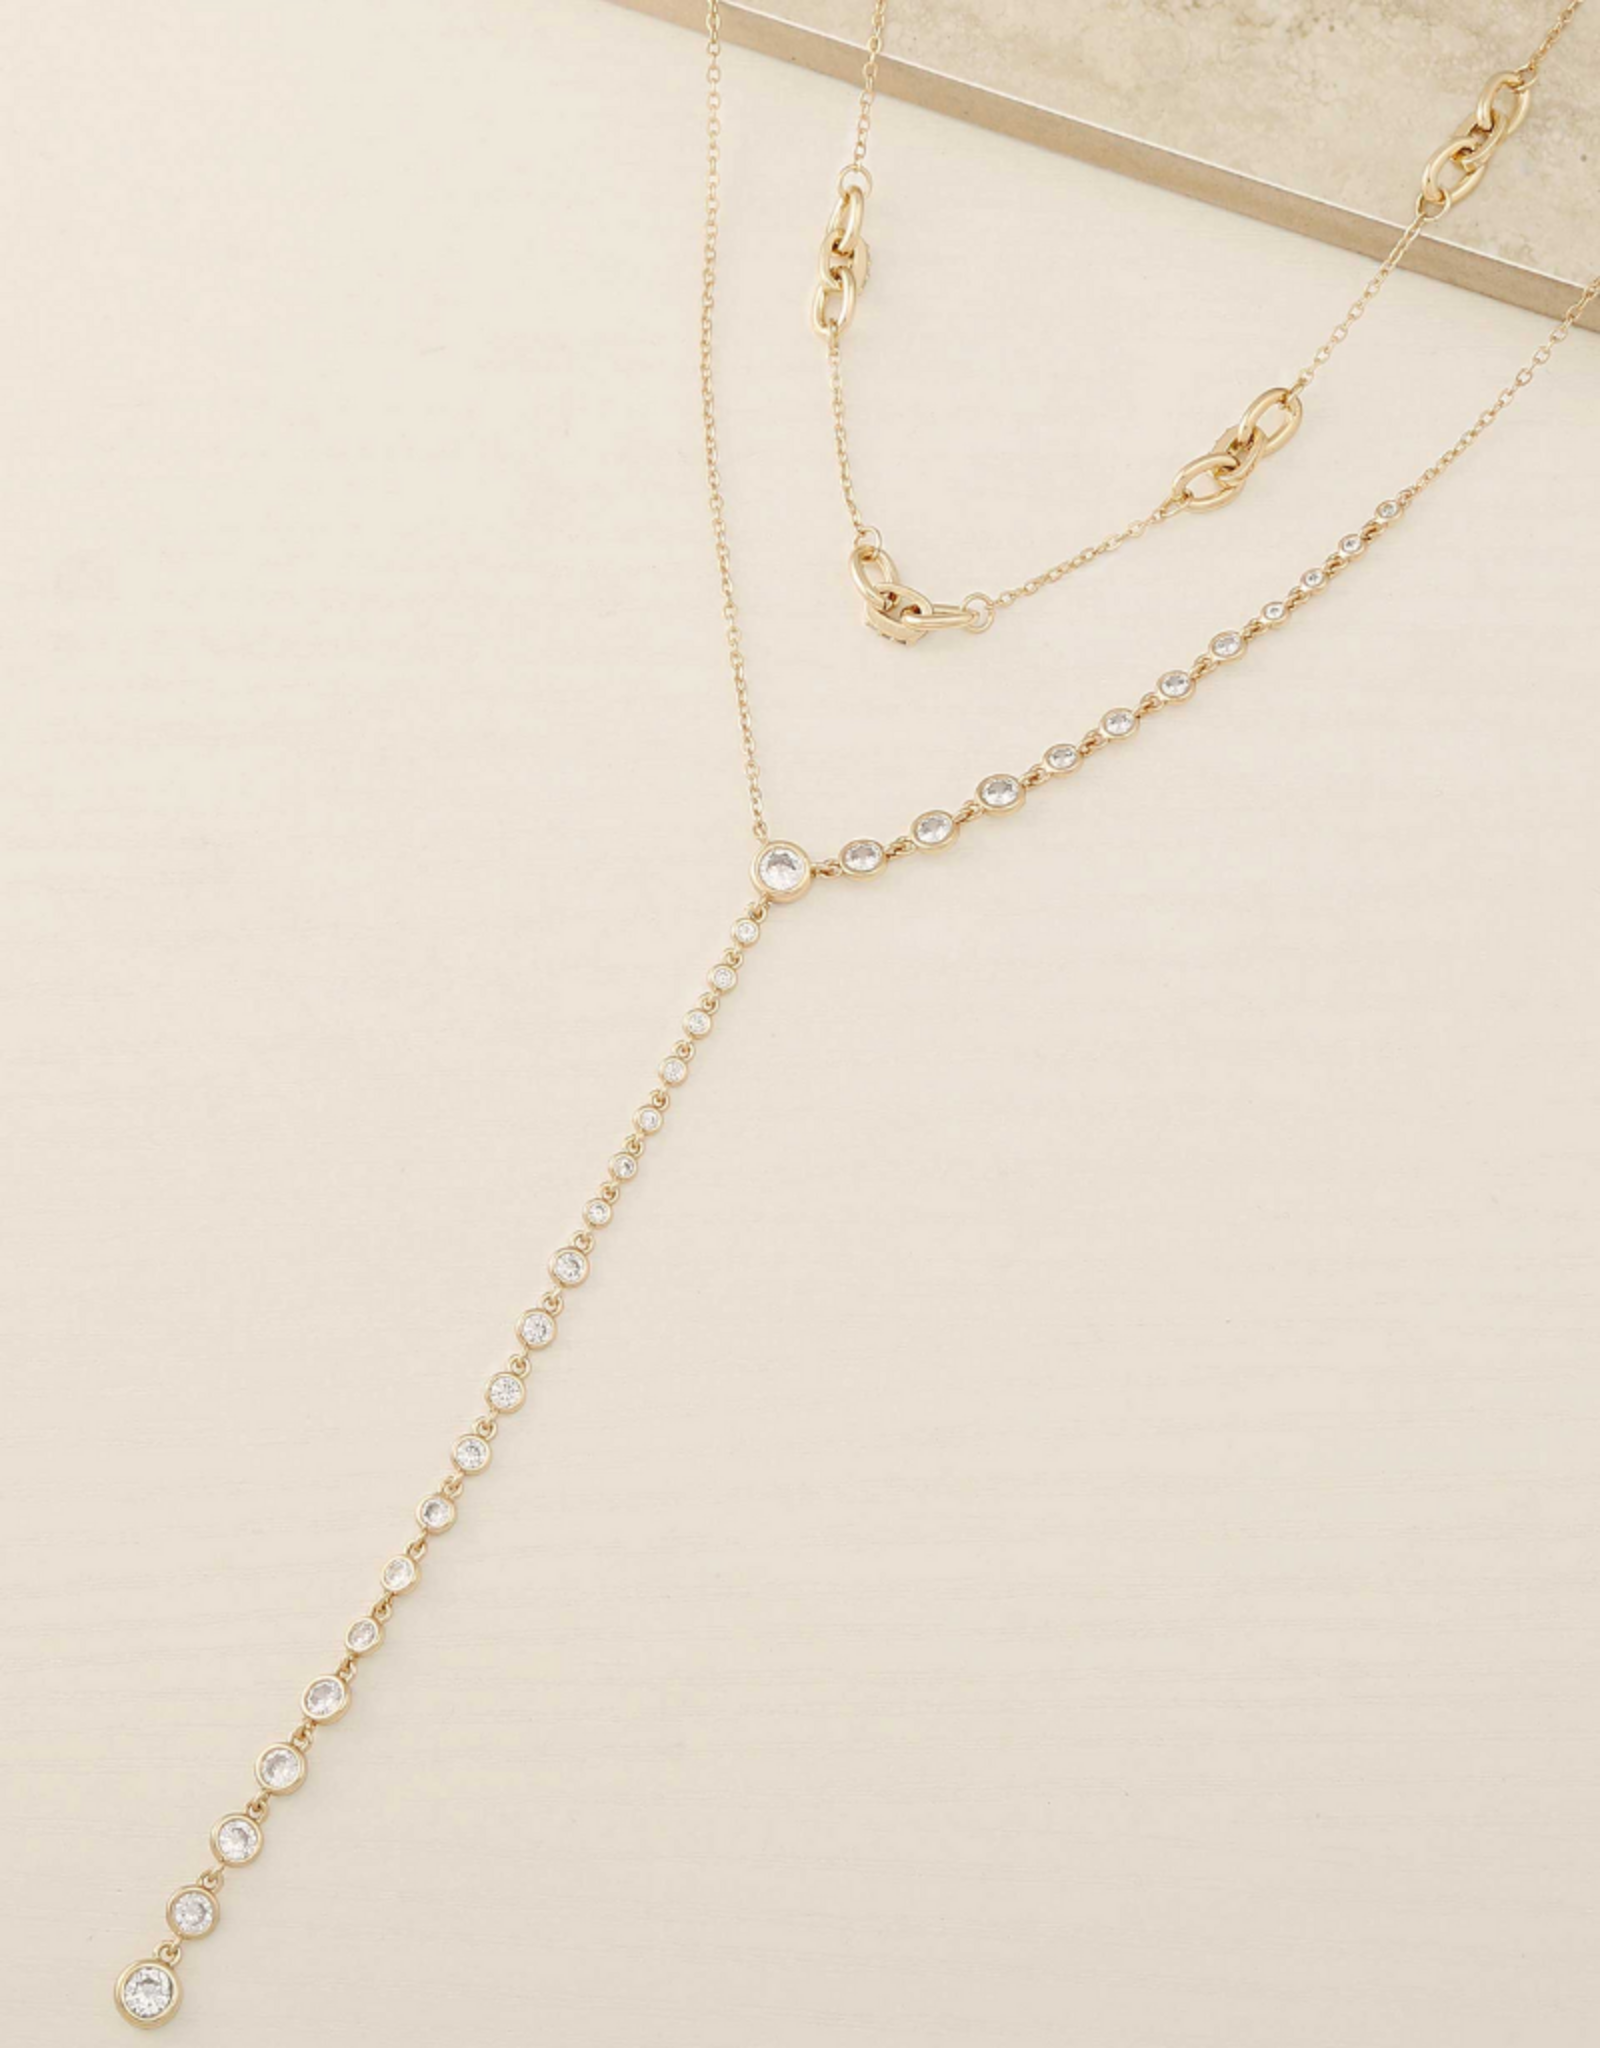 NECKLACE-LAYERED-LARIAT W/CRYSTALS GOLD